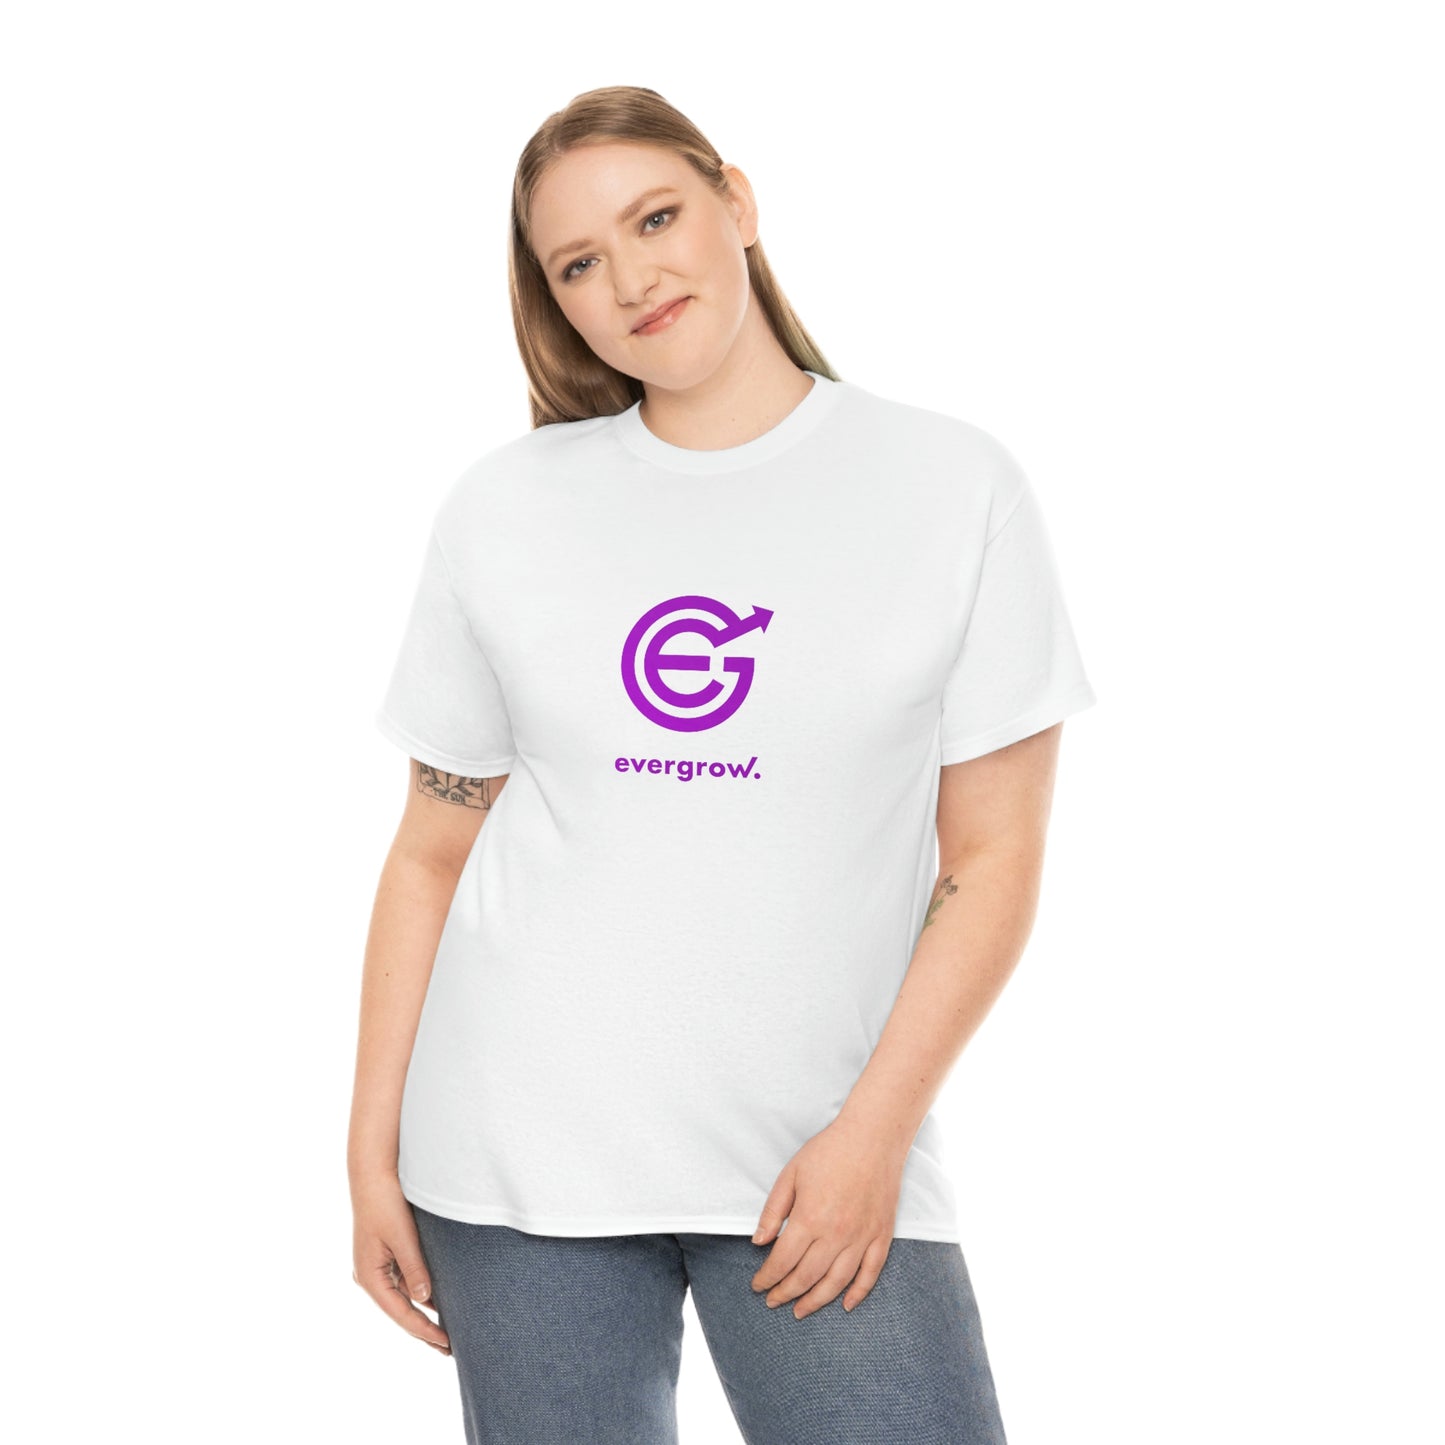 Copy of USA - Unisex Heavy Cotton Tee - EverGrow Logo in White and evergrow below - White shirt using EGC Purple color